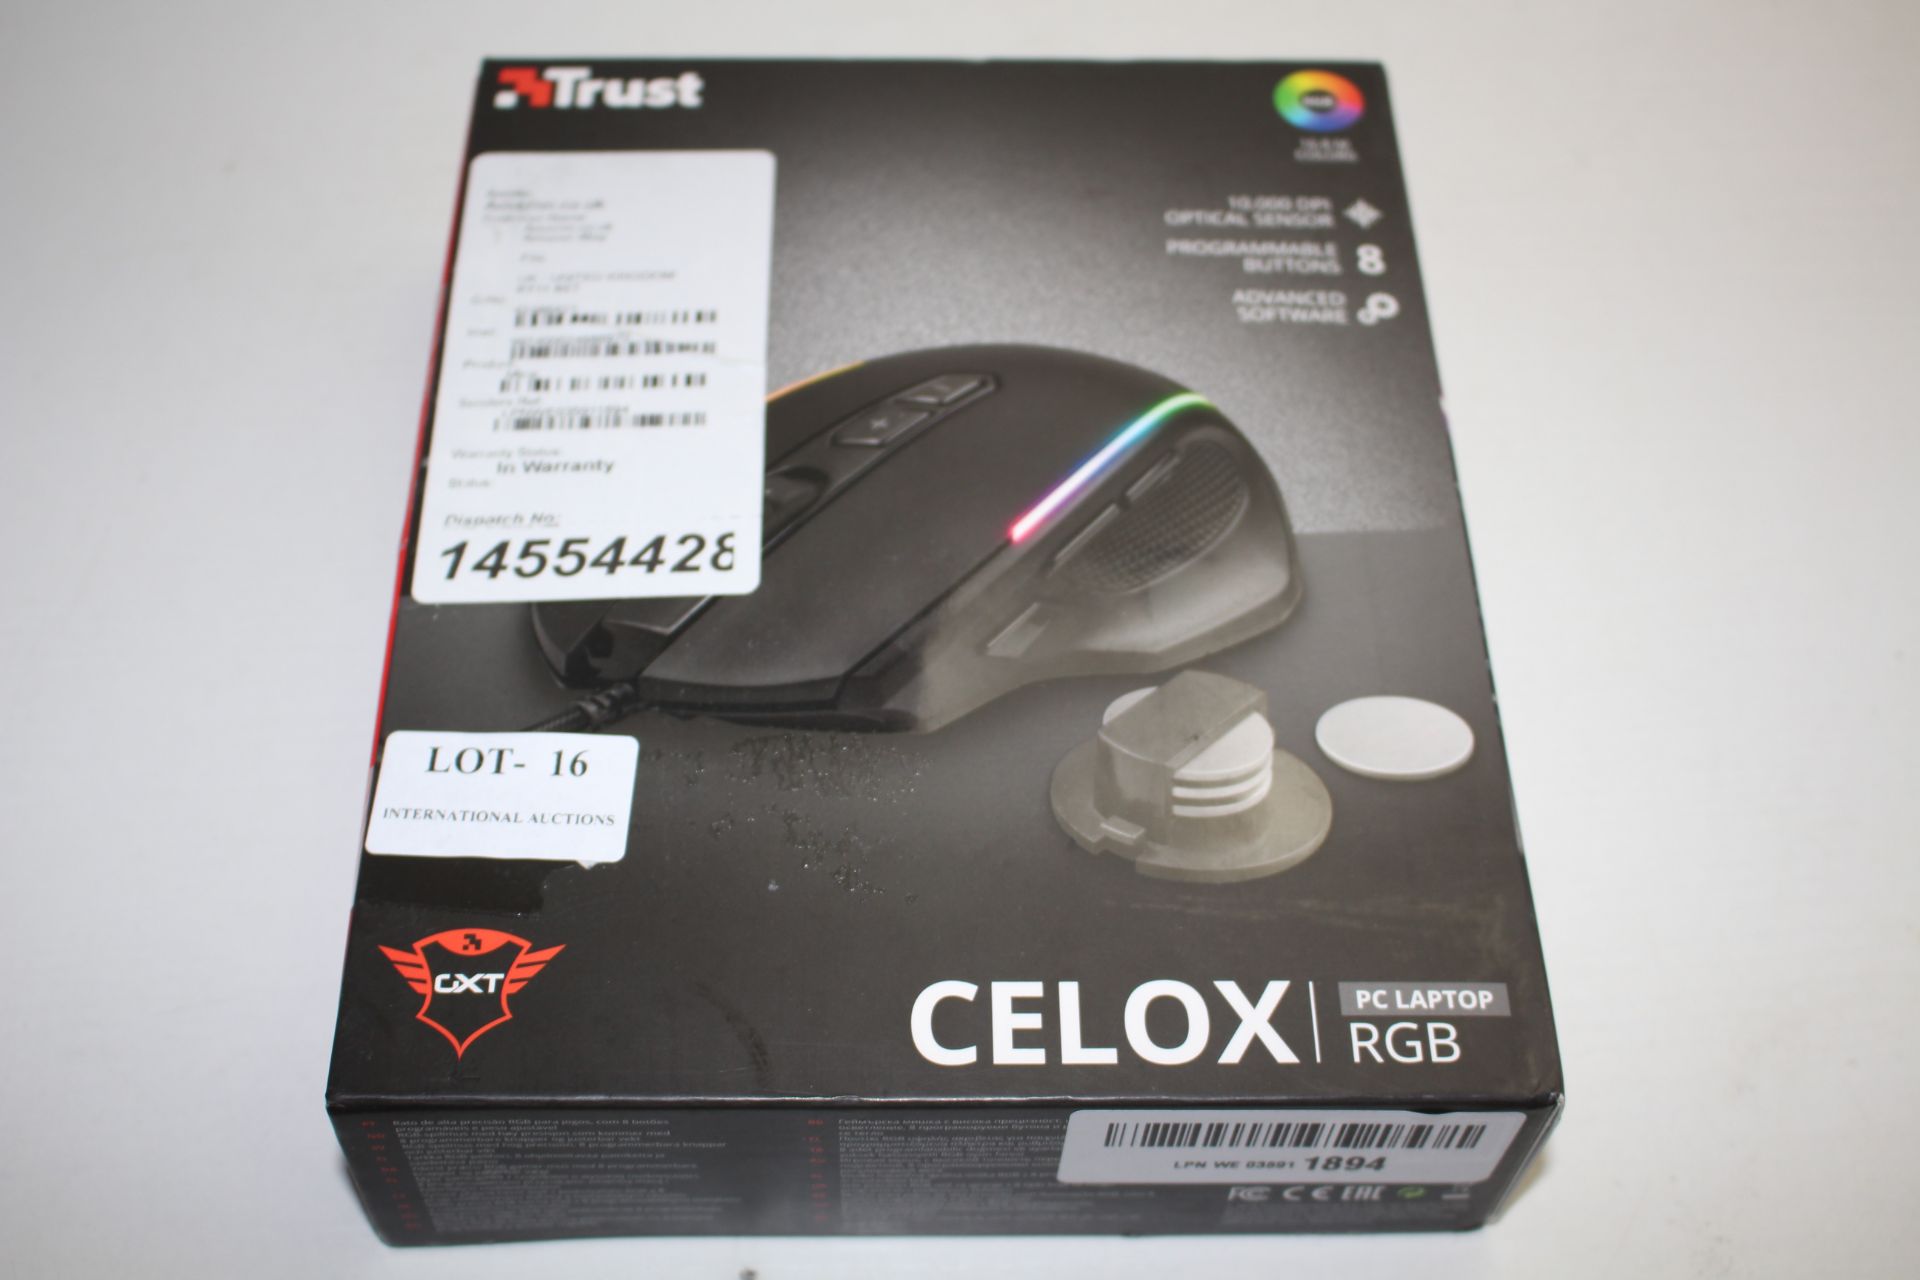 BOXED TRUST CELOX PC LAPTOP RGB MOUSE RRP £44.99Condition ReportAppraisal Available on Request-